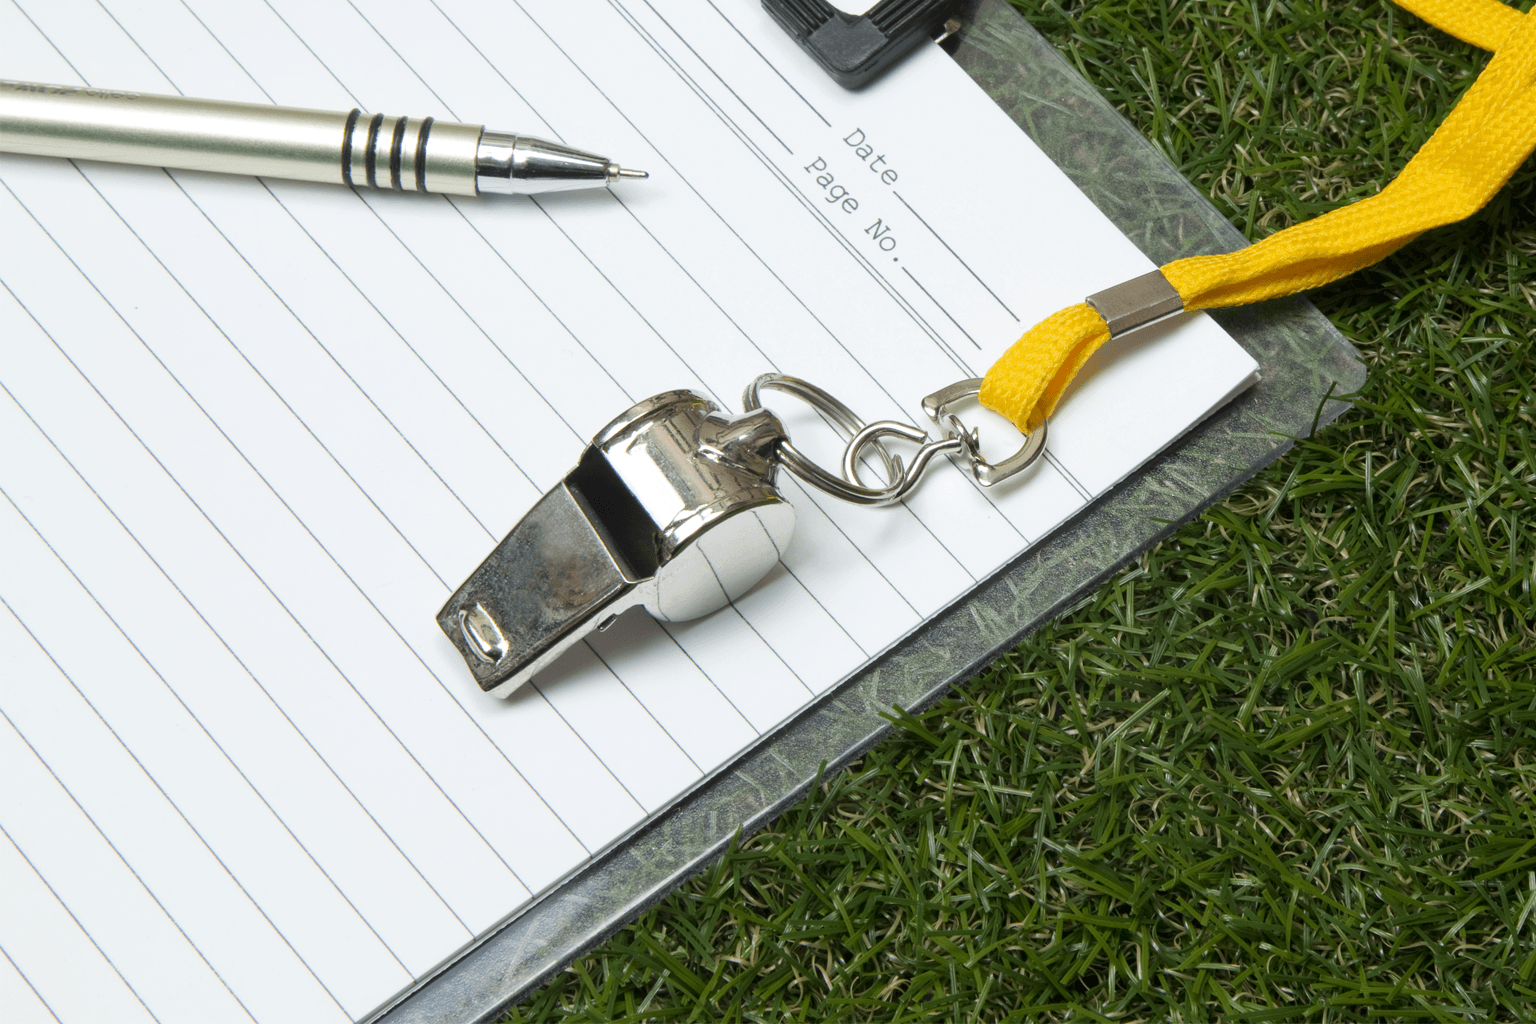 Notepad and pen sitting on grass with a referee's whistle.